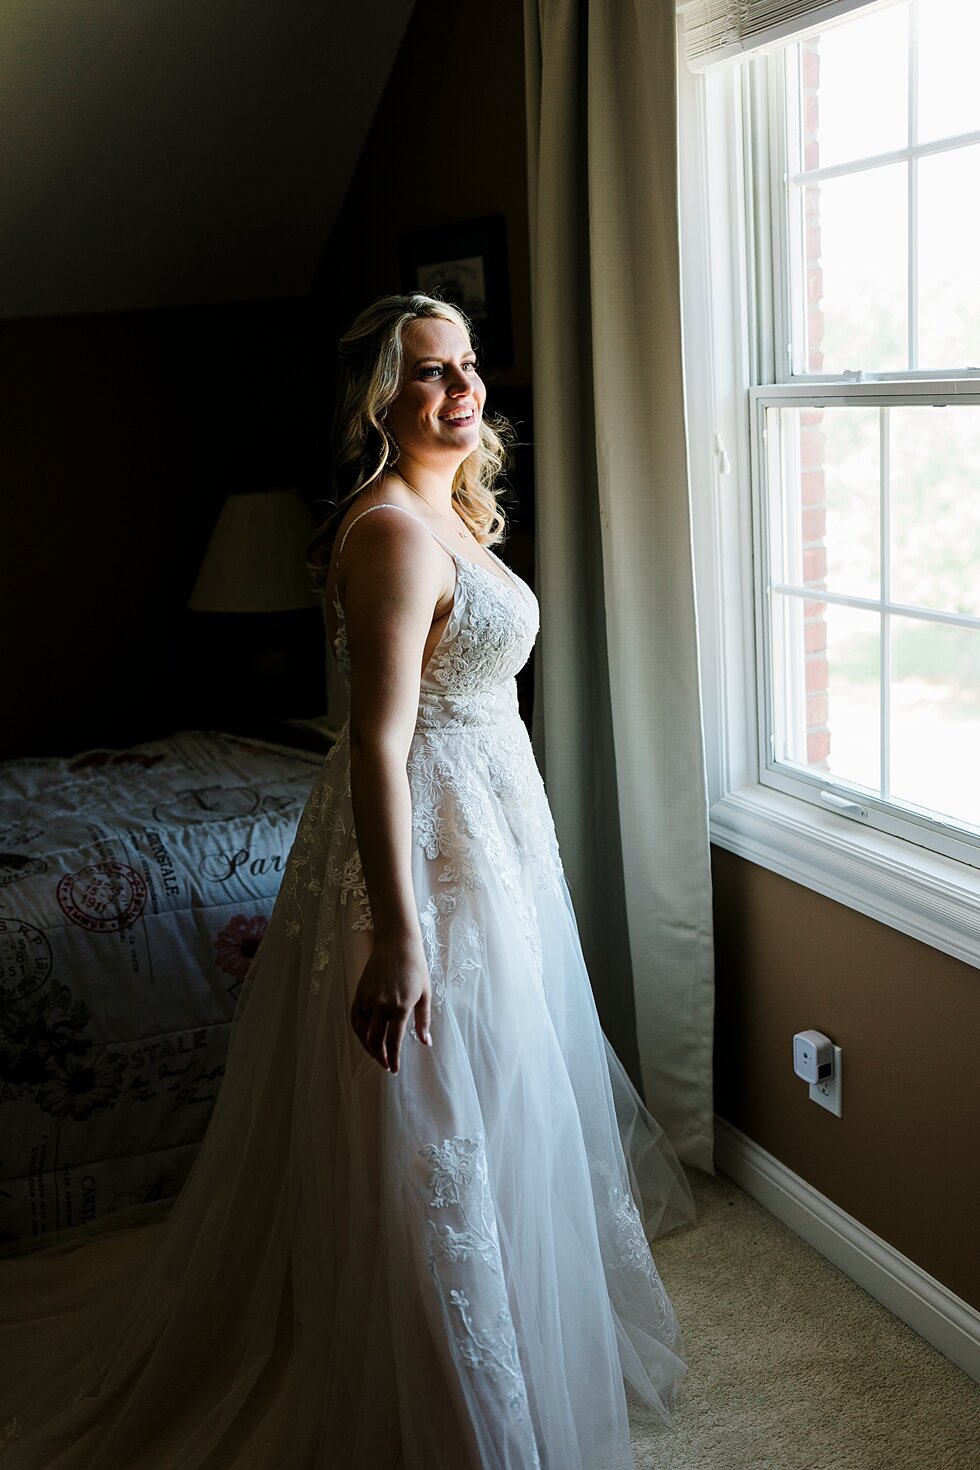  Absolutely stunning bride getting ready to walk down the aisle to become a married woman. Romantic casual lace wedding gown close friends neutral colors background wedding natural greenery crisp white #midwestphotographer #kywedding #louisville #ken